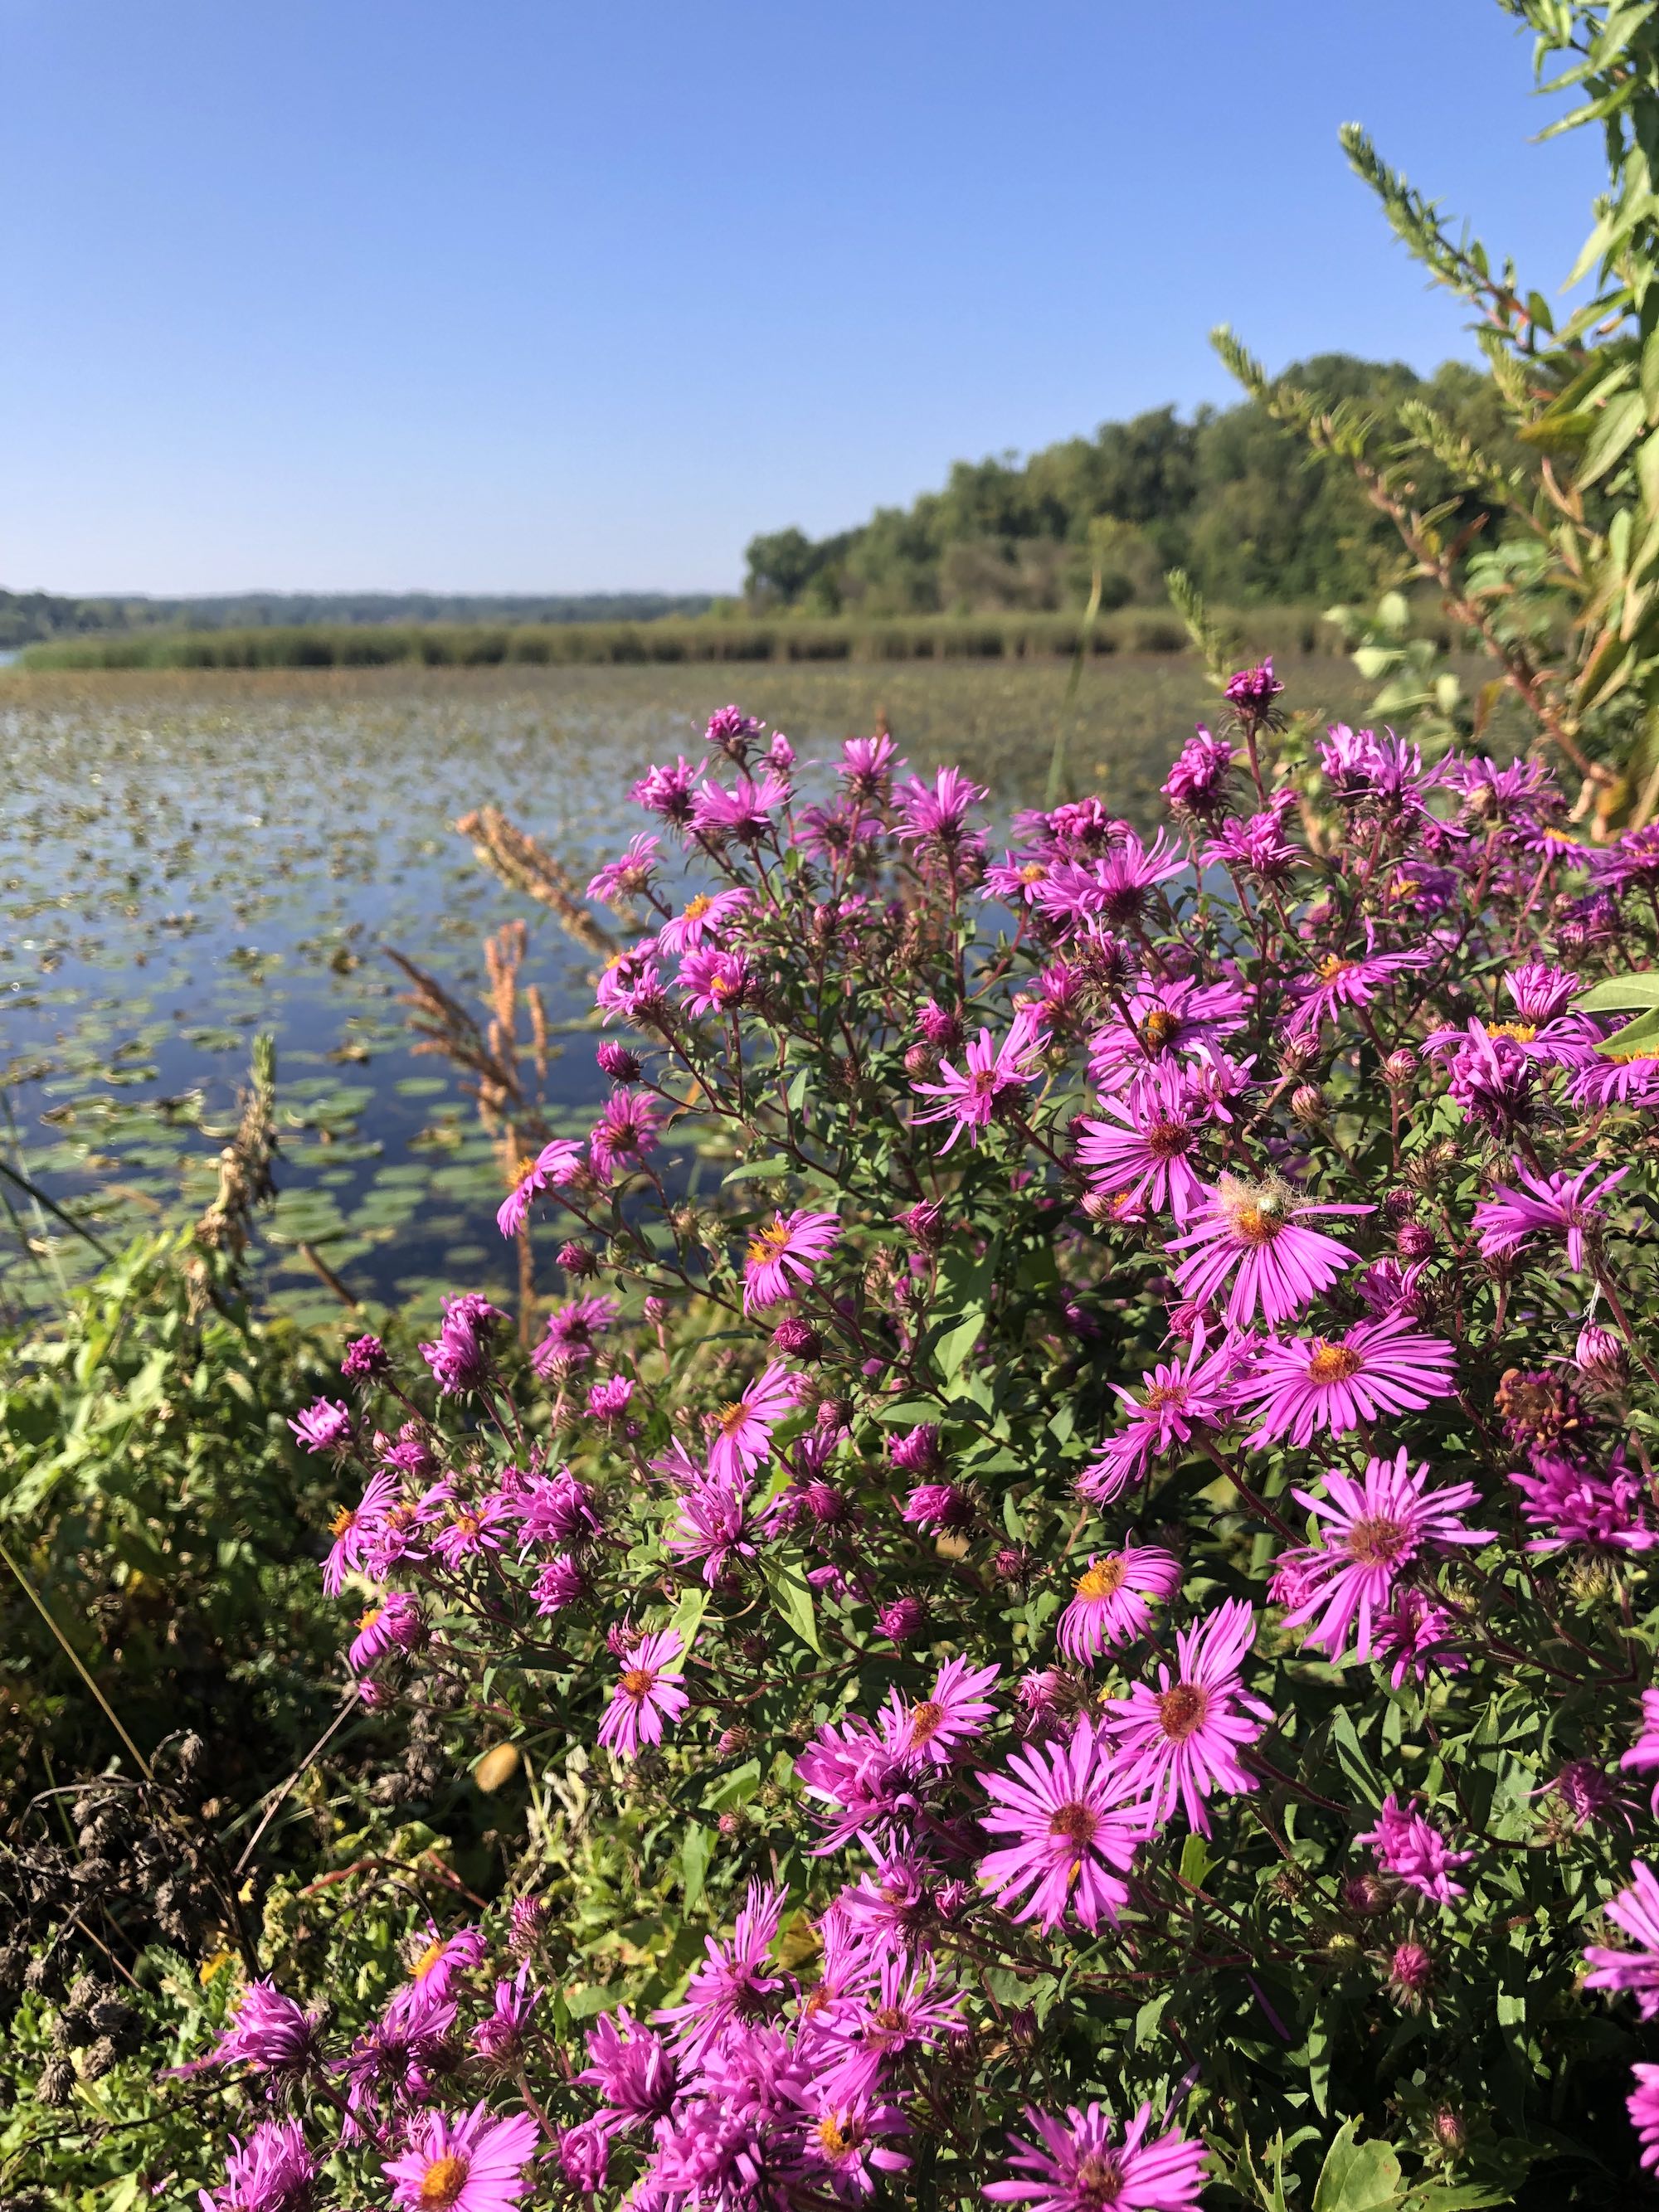 New England Aster on shore of Lake Wingra by Vilas Park in Madison, Wisconsin on September 19, 2022.